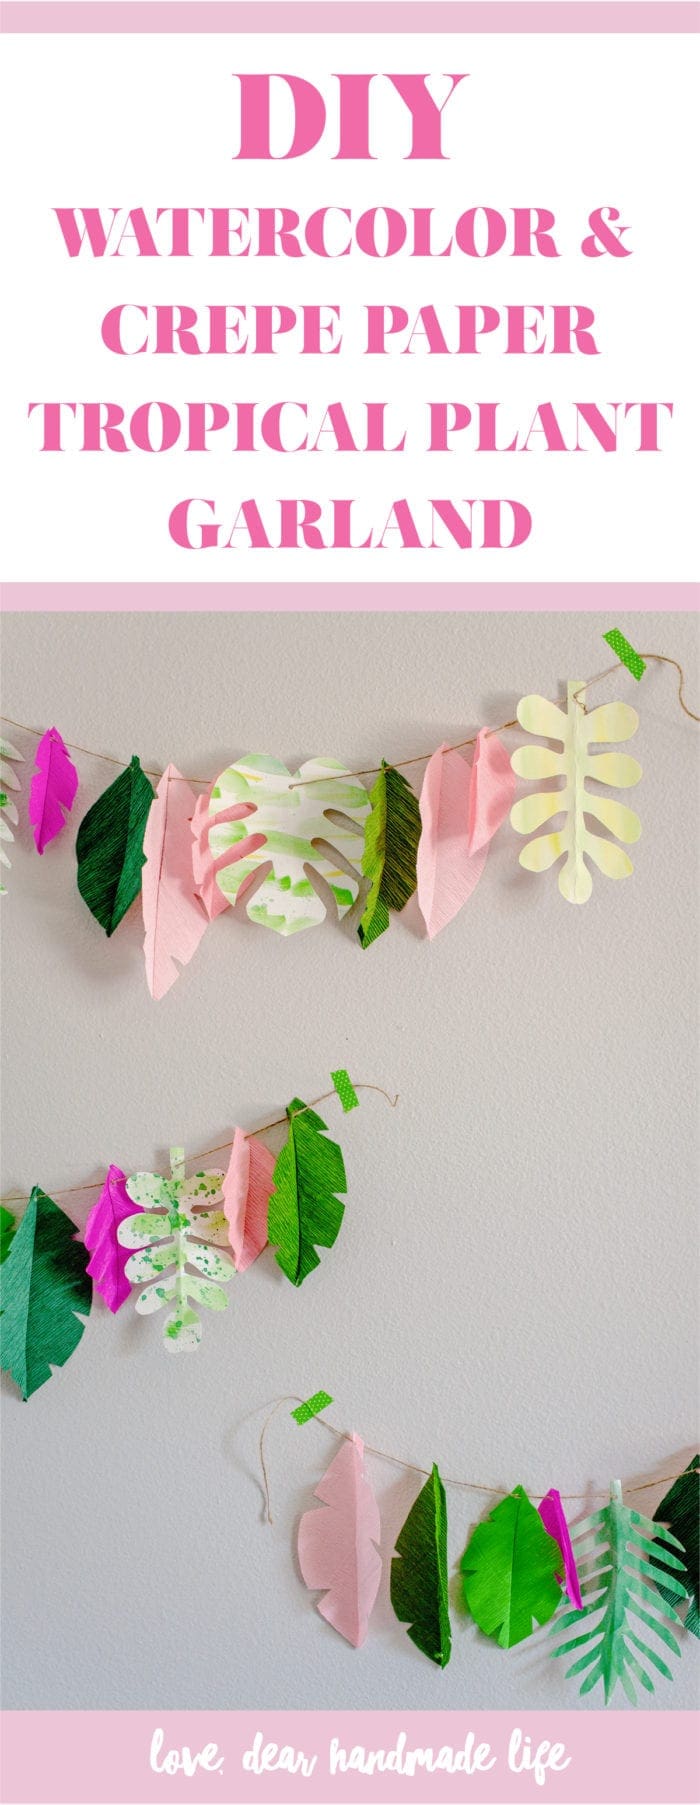 DIY watercolor and crepe paper tropical monstera plant garland from Dear Handmade Life